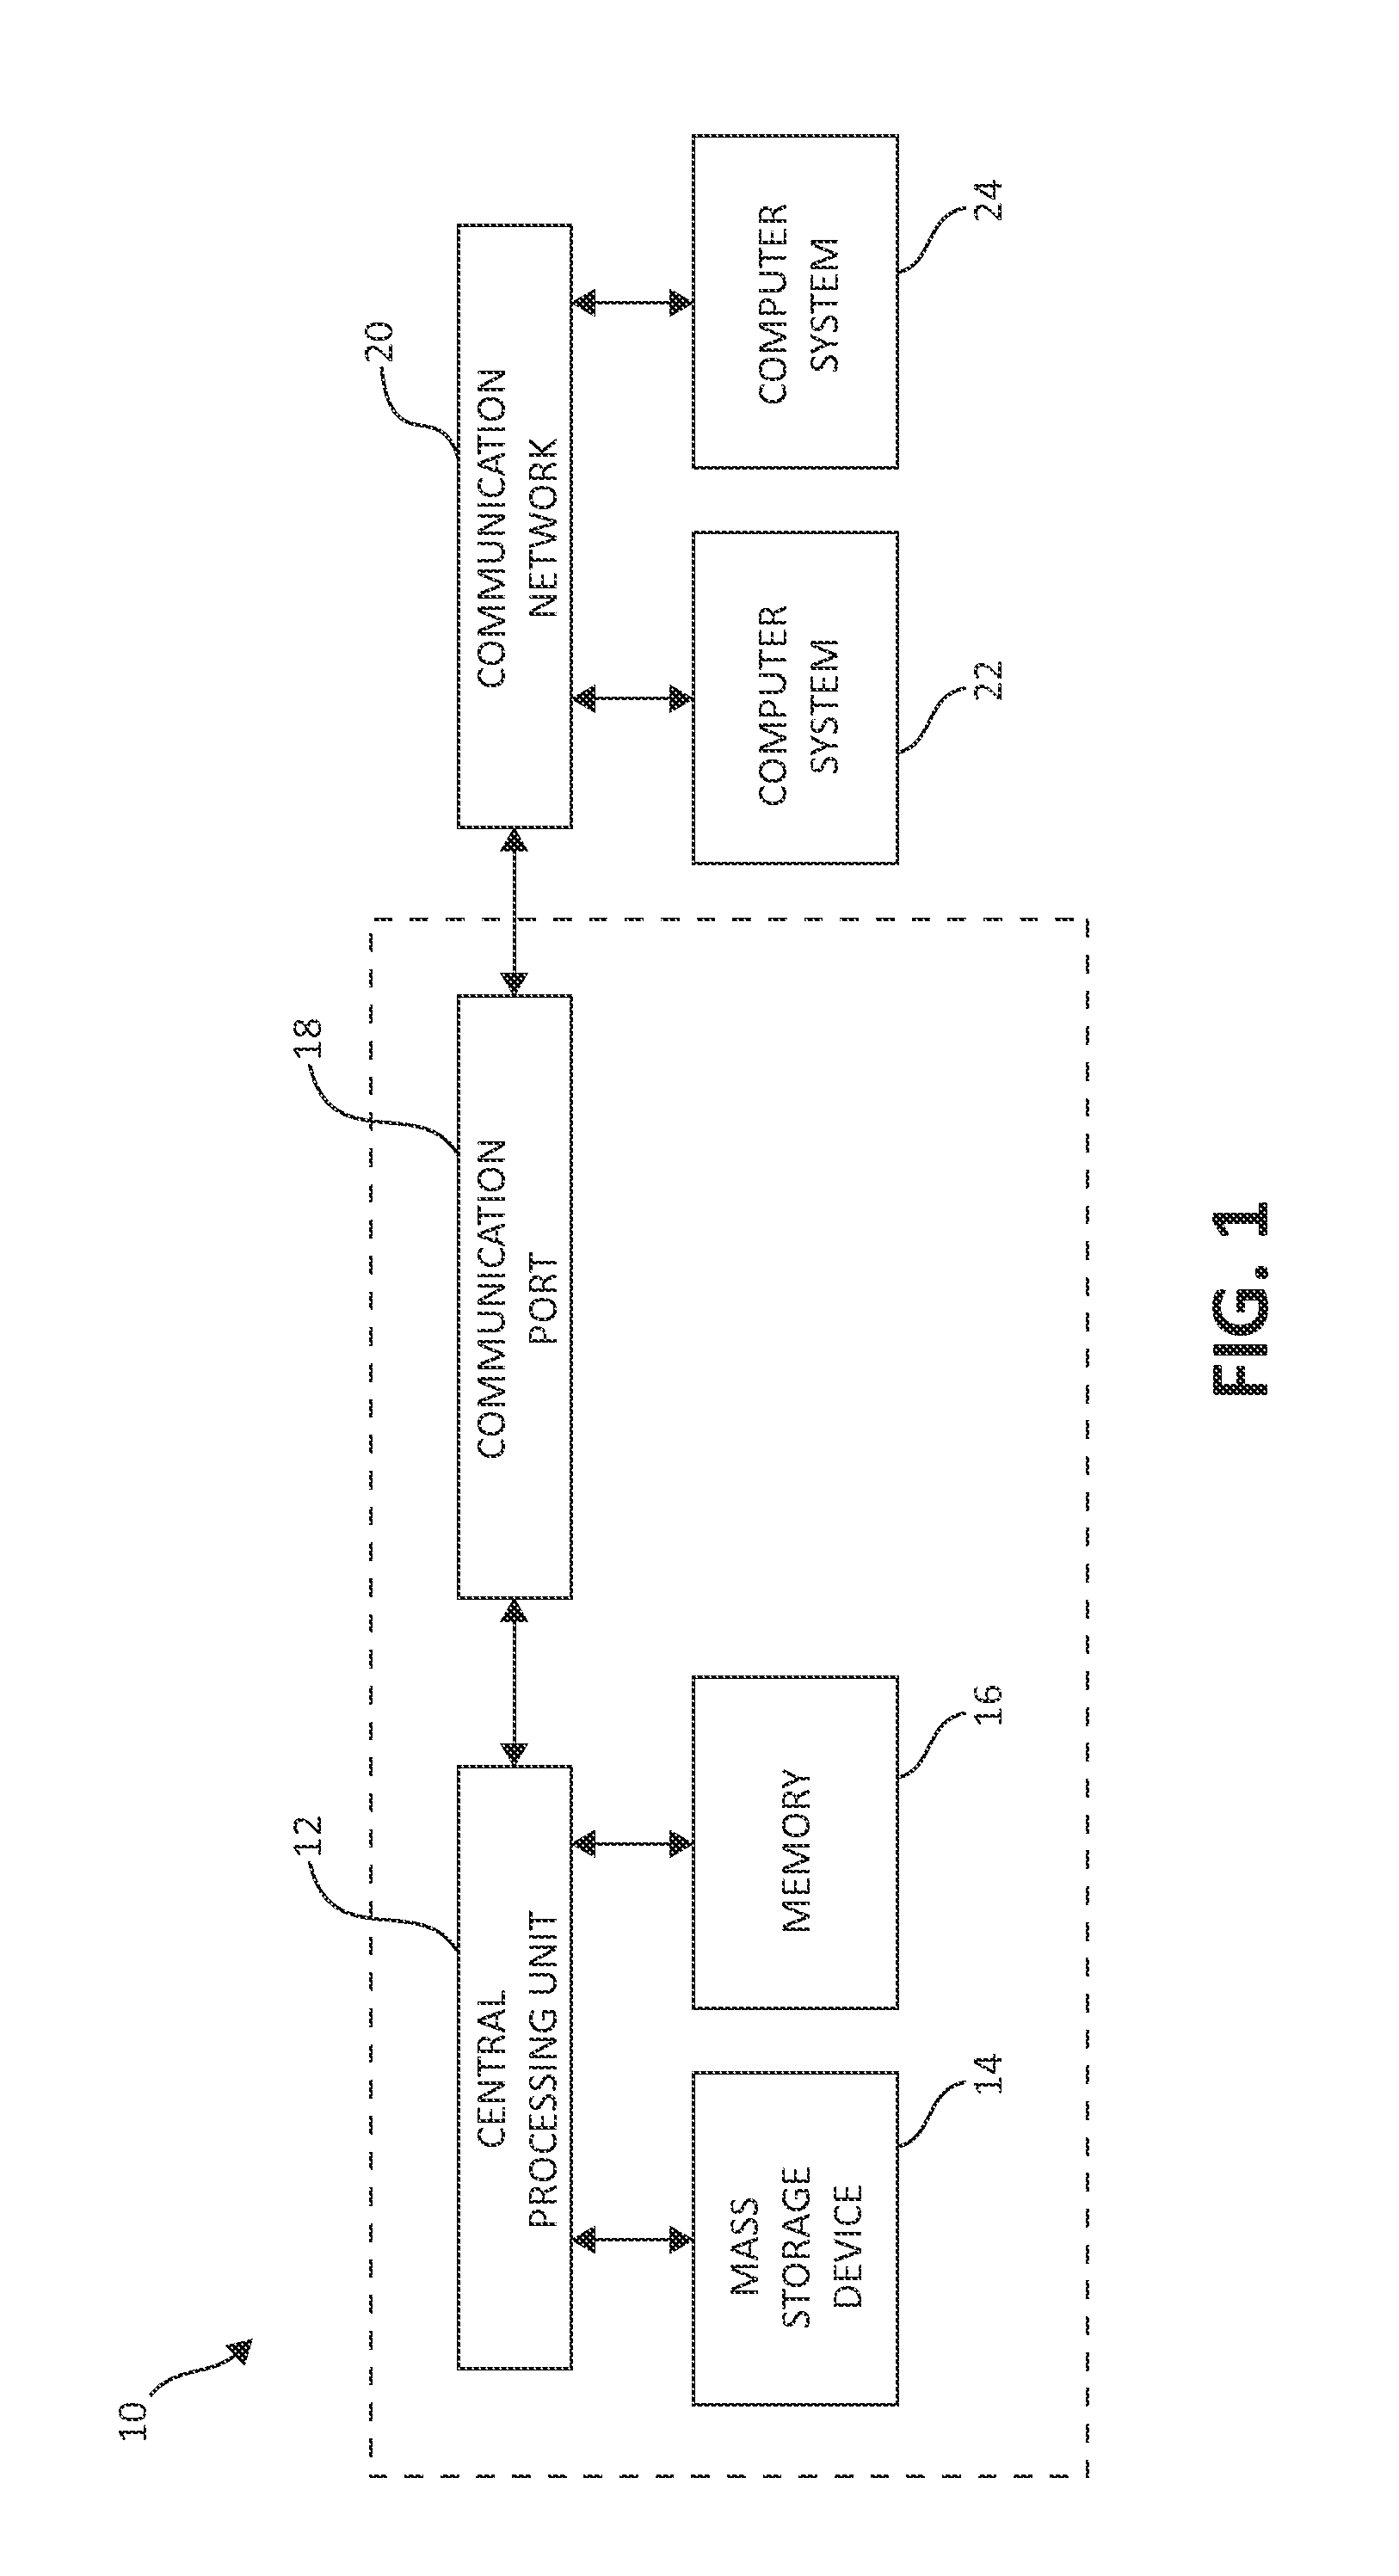 Reducing decompression latency in a compression storage system